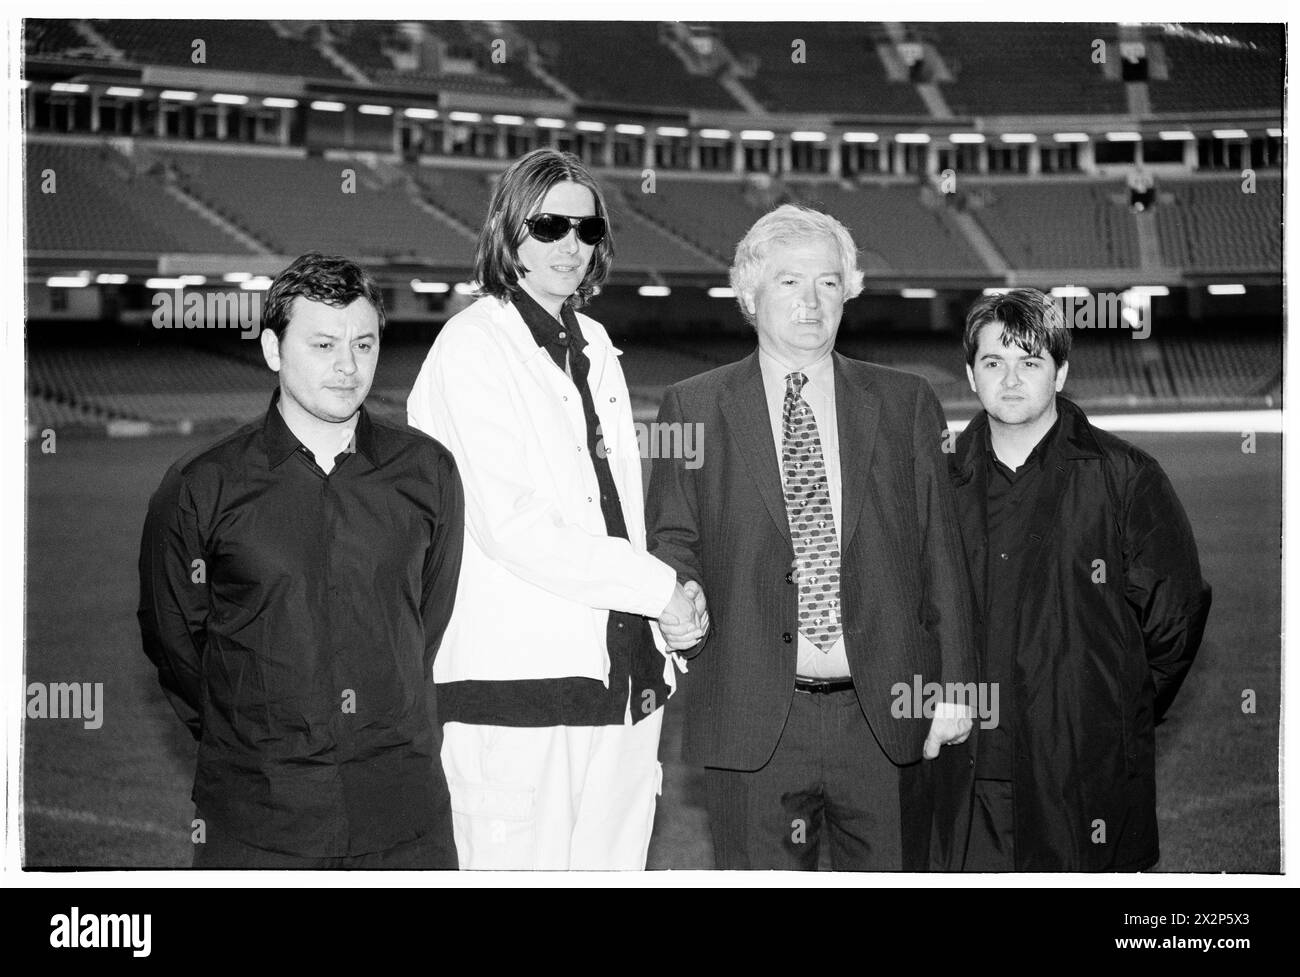 MANIC STREET PREACHERS, PRESS CONFERENCE, 1999: Welsh band Manic Street Preachers with Glanmor Griffiths  from the WRU at a Press Conference at Millennium Stadium, Cardiff Wales, UK on 1 November 1999. The band were promoting their millennium night gig in front of more than 57,000 fans on New Year's Eve 1999–2000 at the Millennium Stadium in Cardiff, called 'Leaving The 20th Century'. Photo: Rob Watkins. INFO: Manic Street Preachers, a Welsh rock band formed in 1986, emerged as icons of the '90s British music scene. Known for their politically charged lyrics and anthemic melodies, hits like 'A Stock Photo